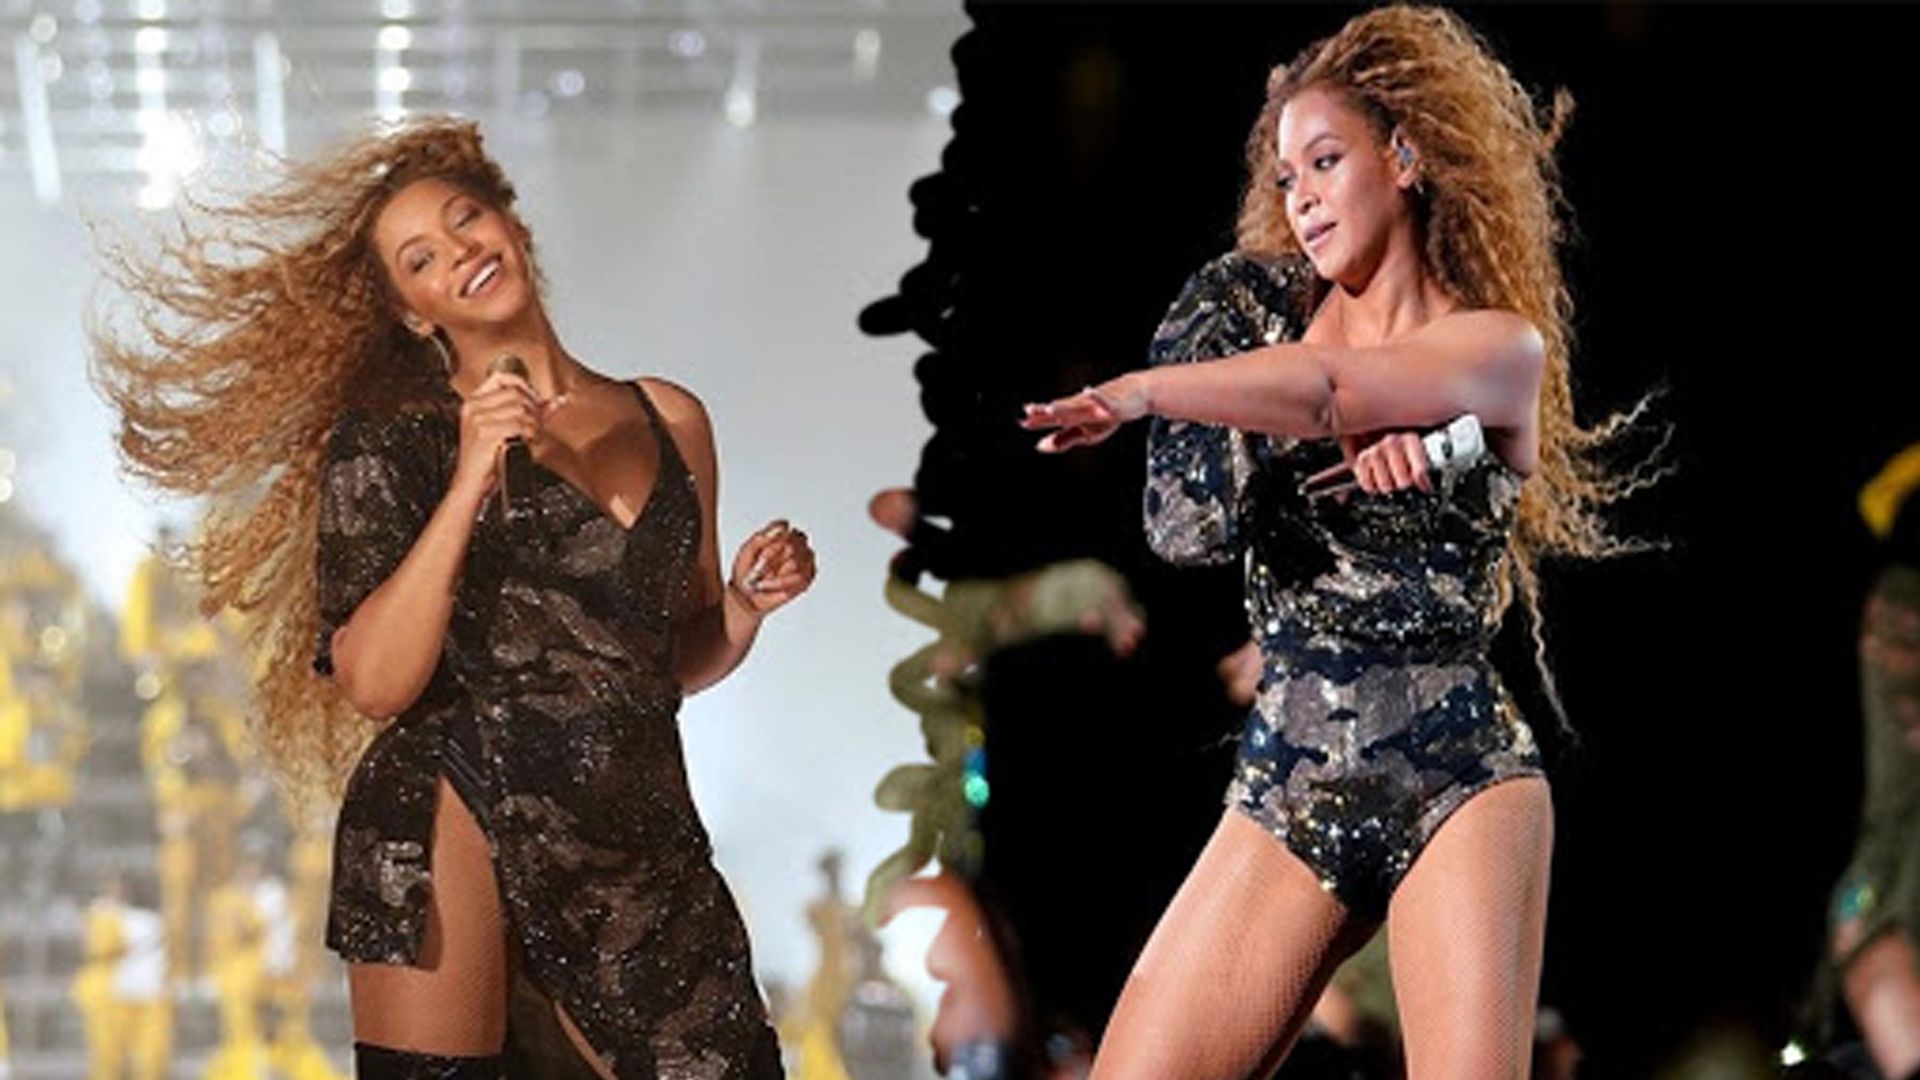 Beyonce's wardrobe malfunction didn't stop her from performing at Coachella